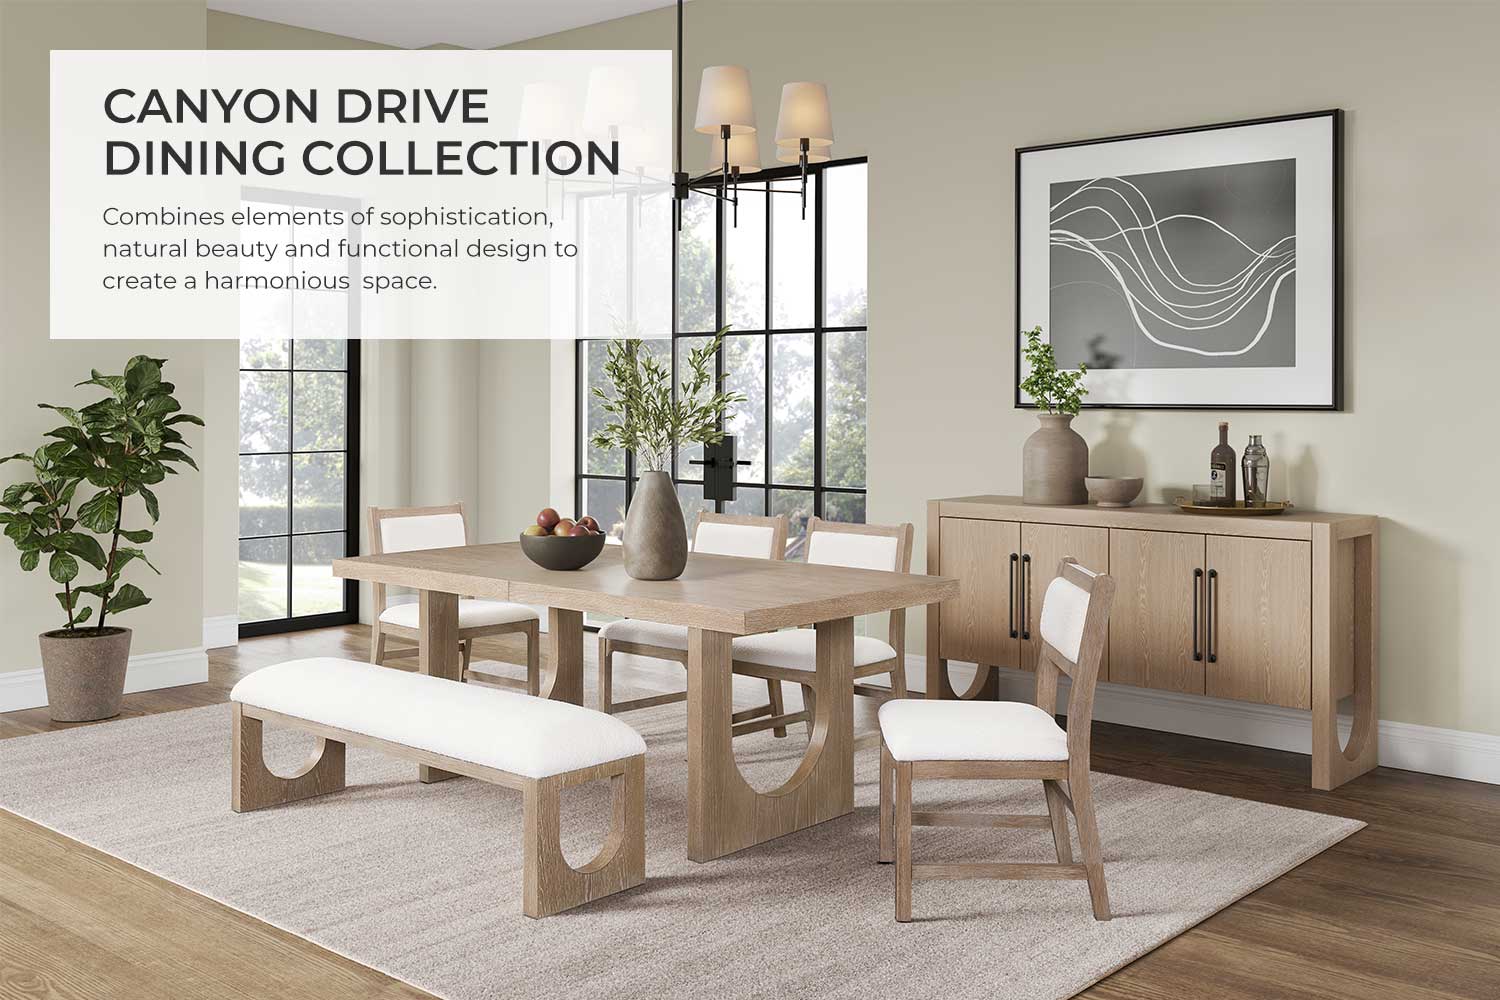 Canyon Drive Dining Collection